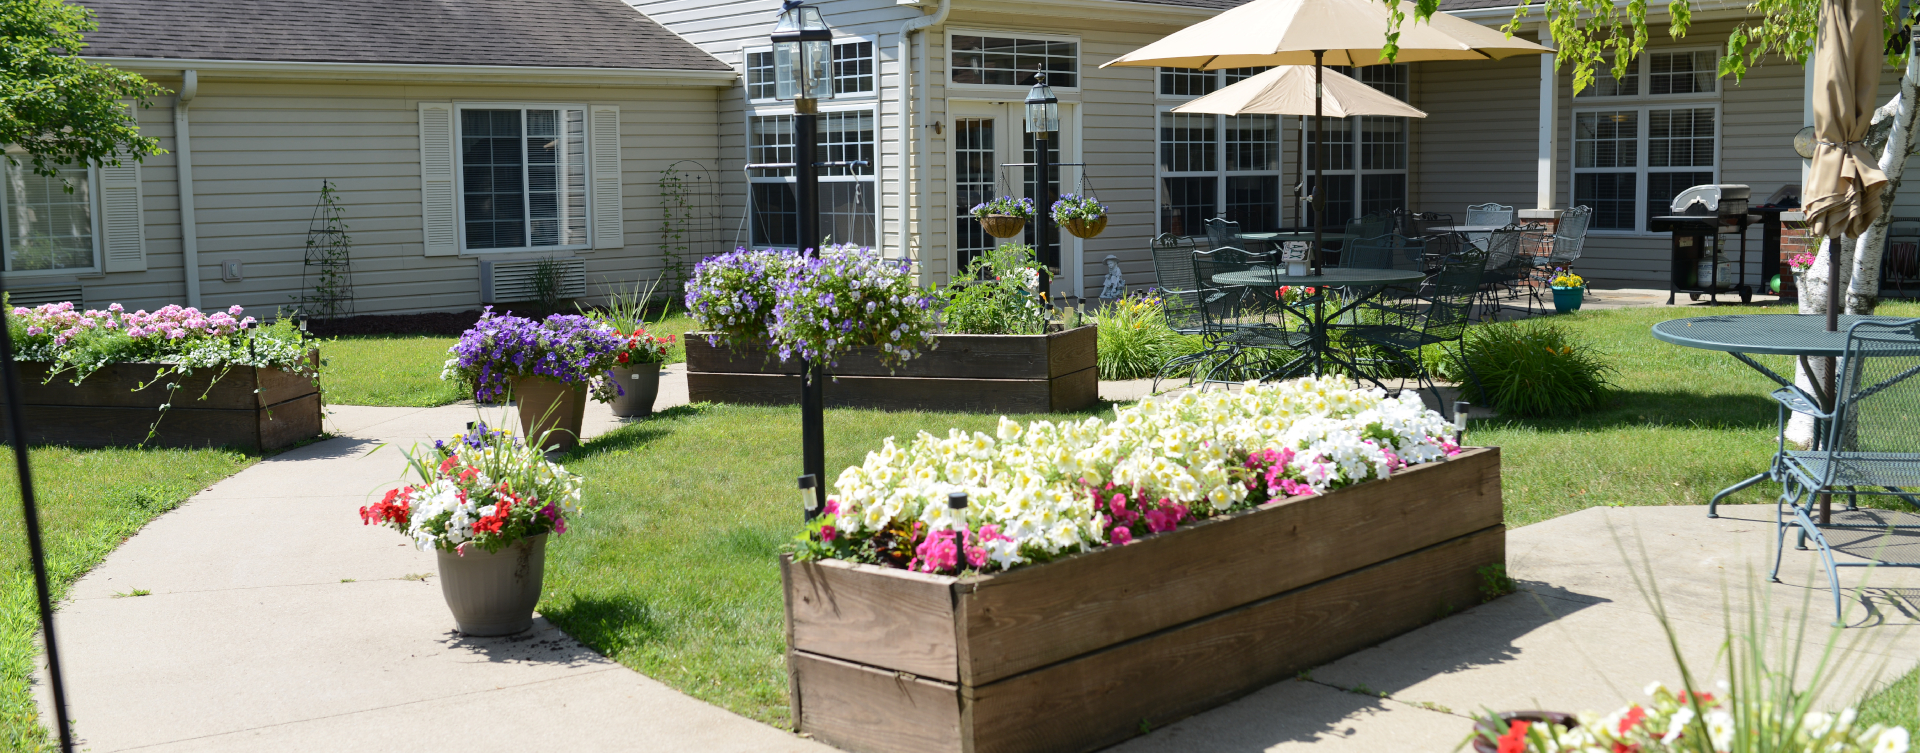 Enjoy bird watching, gardening and barbecuing in our courtyard at Bickford of Sioux City